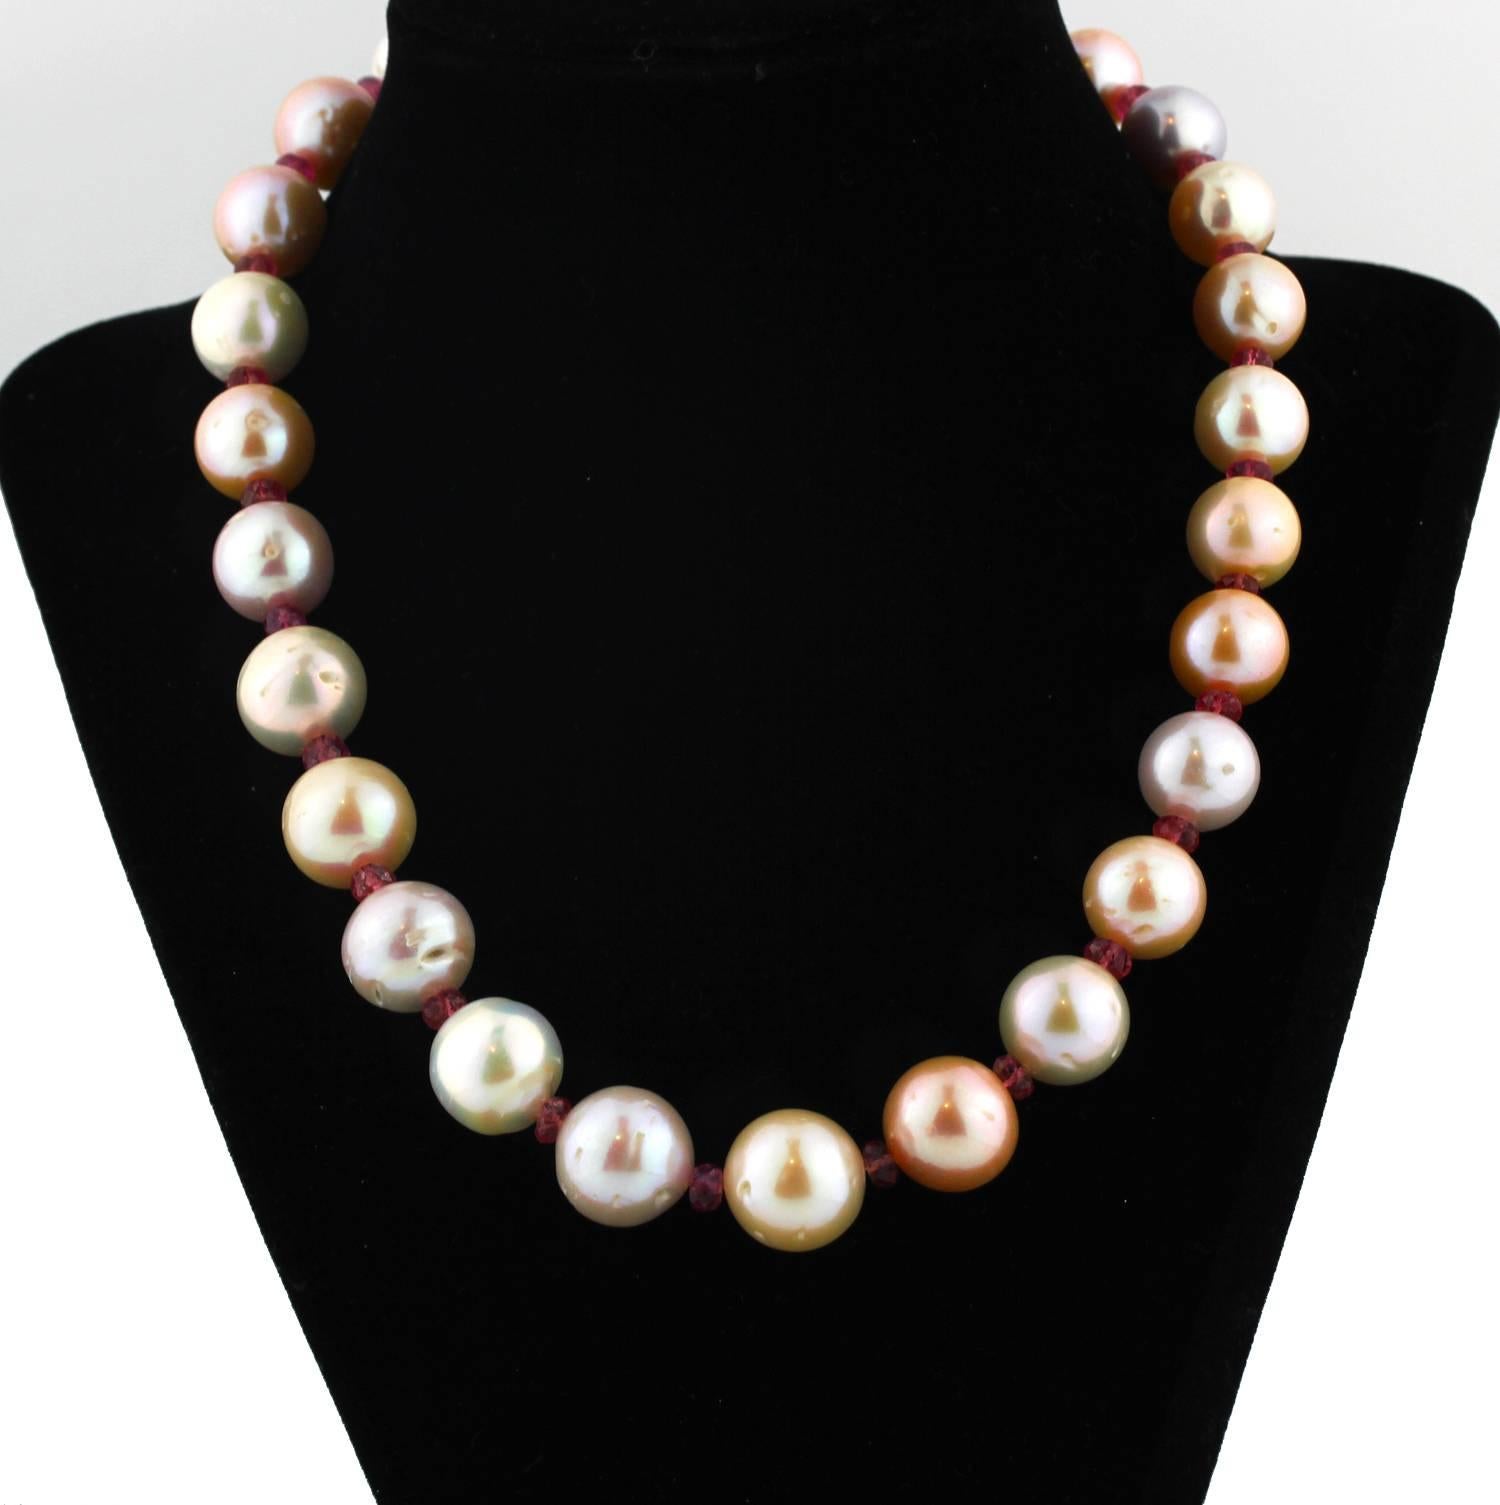 These slightly graduated  multi-color magnificent Pearls (some with their natural beauty marks visible) are enhanced with 29 gem cut sparkling natural pink Tourmalines in this unique handmade necklace.  Size:  largest Pearl 15.5 mm;  Length:  18